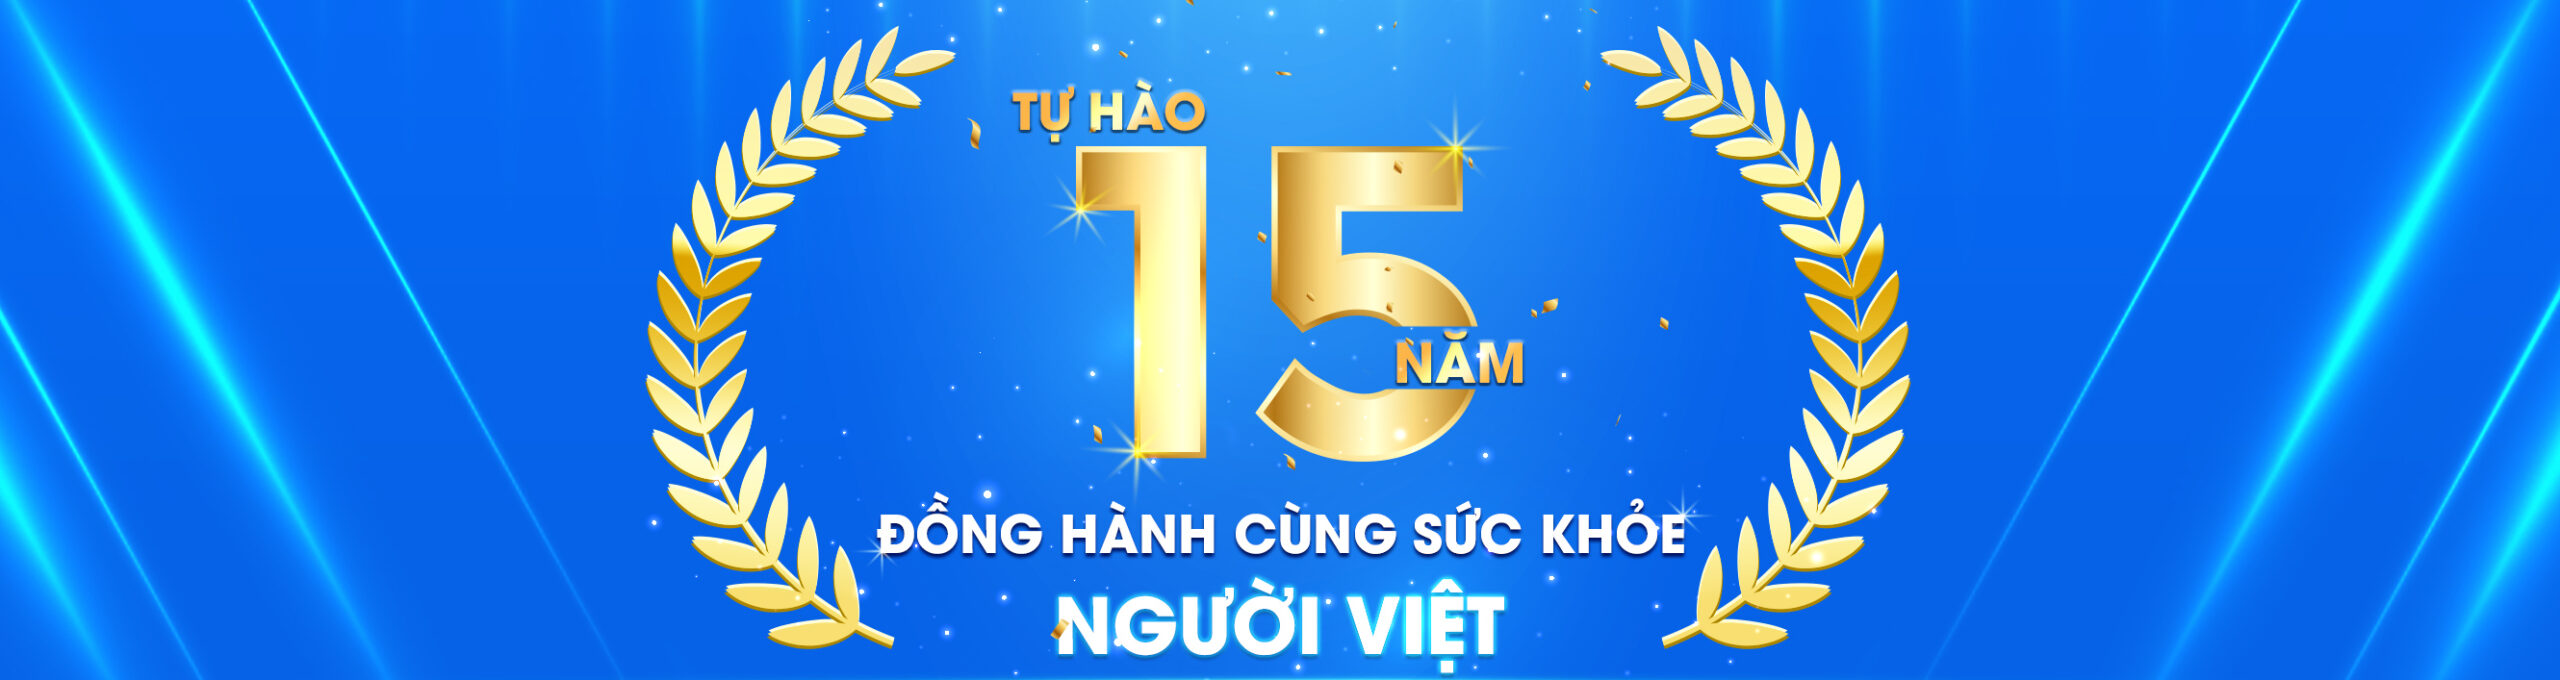 lifesport 15 nam dong hanh cung suc khoe nguoi viet 1 scaled